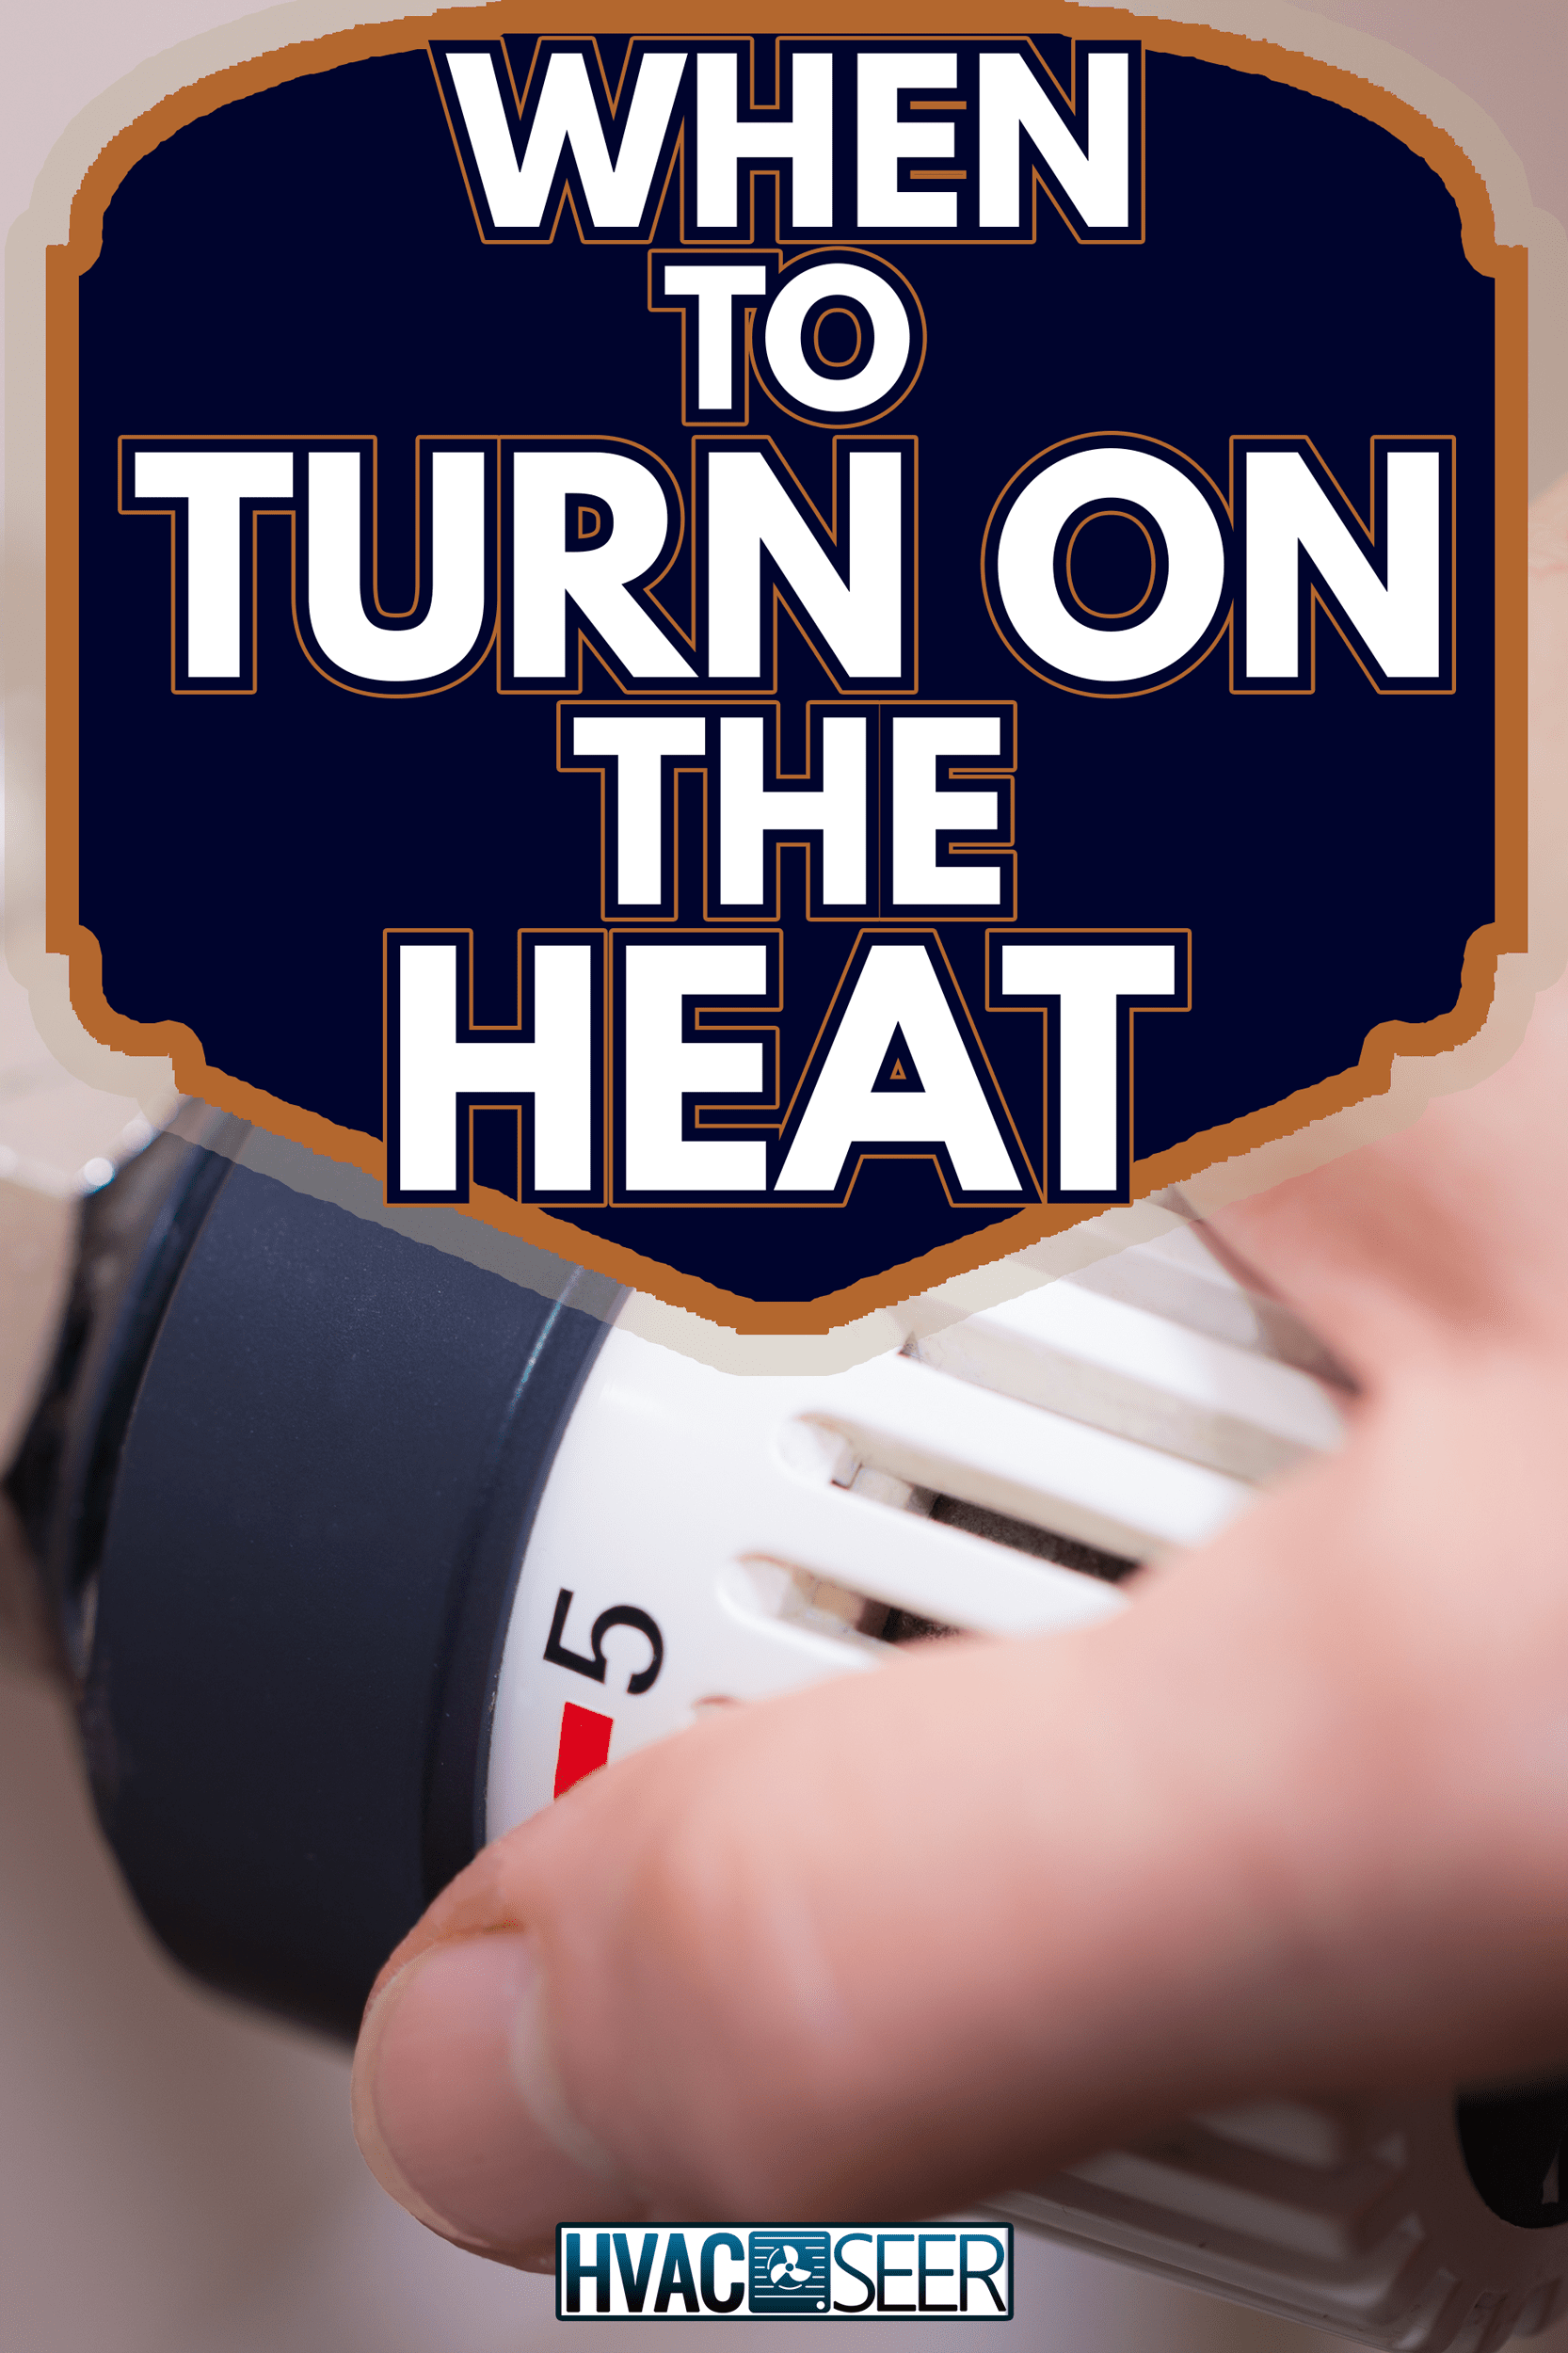 The thermostat of a heater is turned off - When To Turn On The Heat